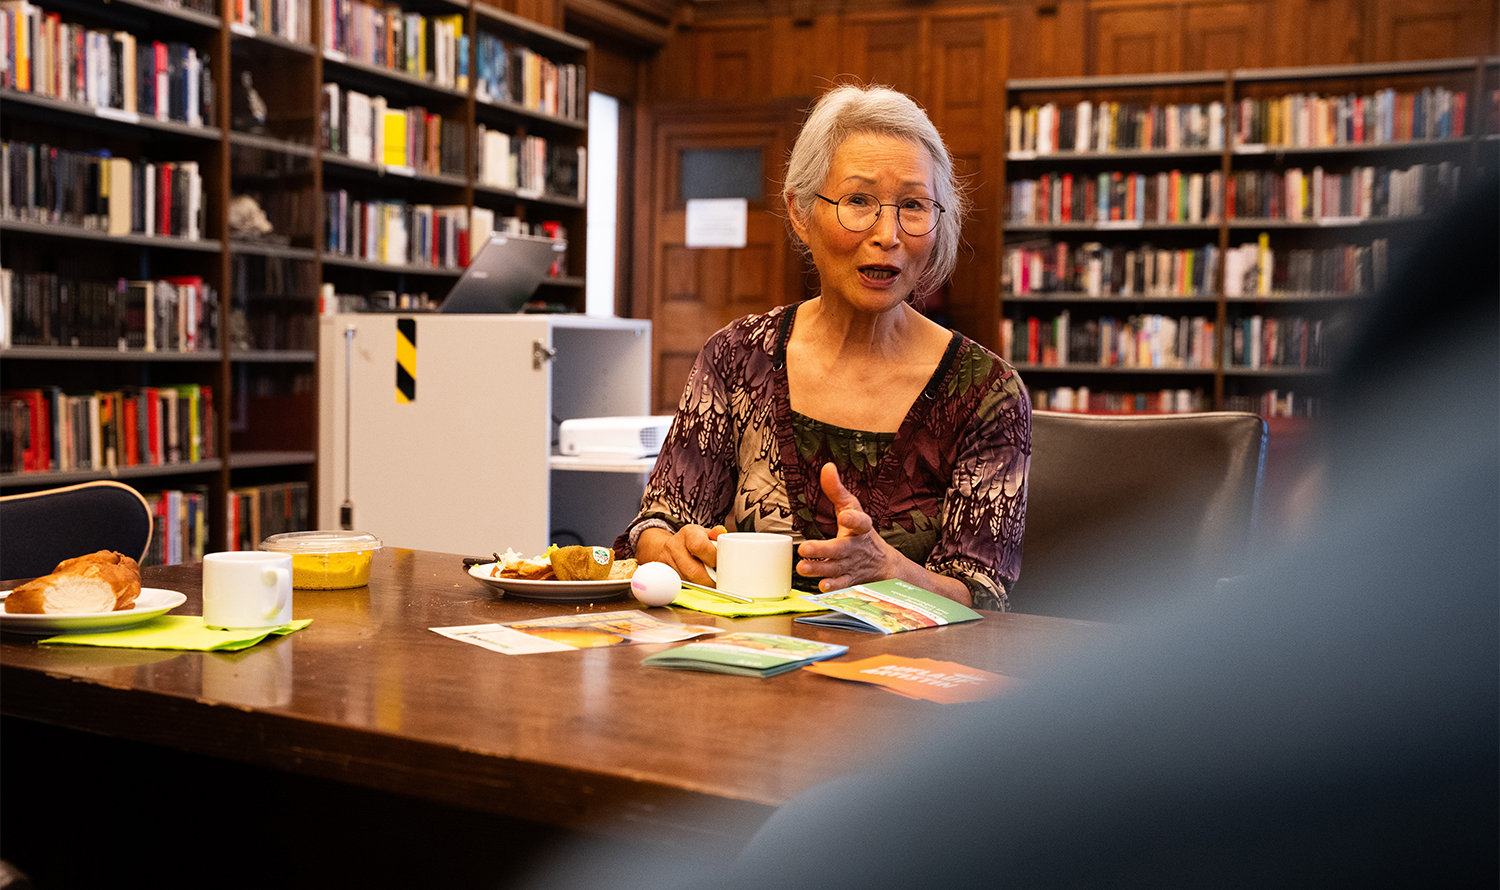 A woman drinks coffee in the crime library.